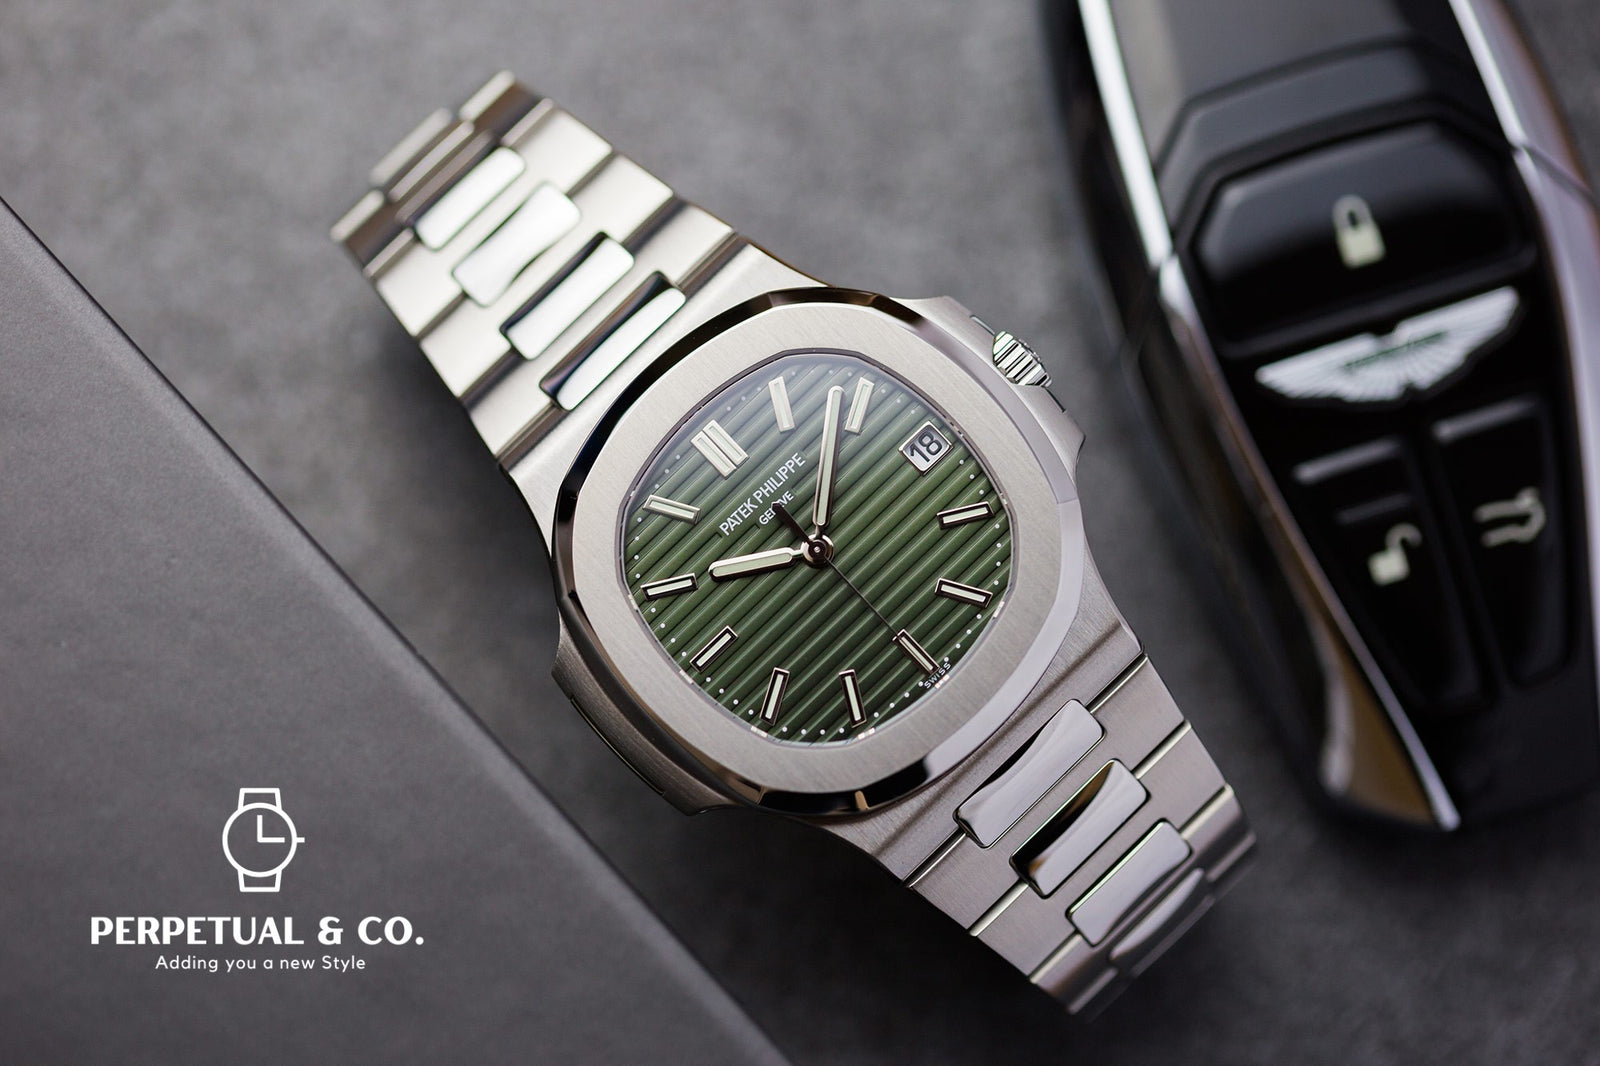 How To Buy A Patek Philippe Nautilus Reference 5711